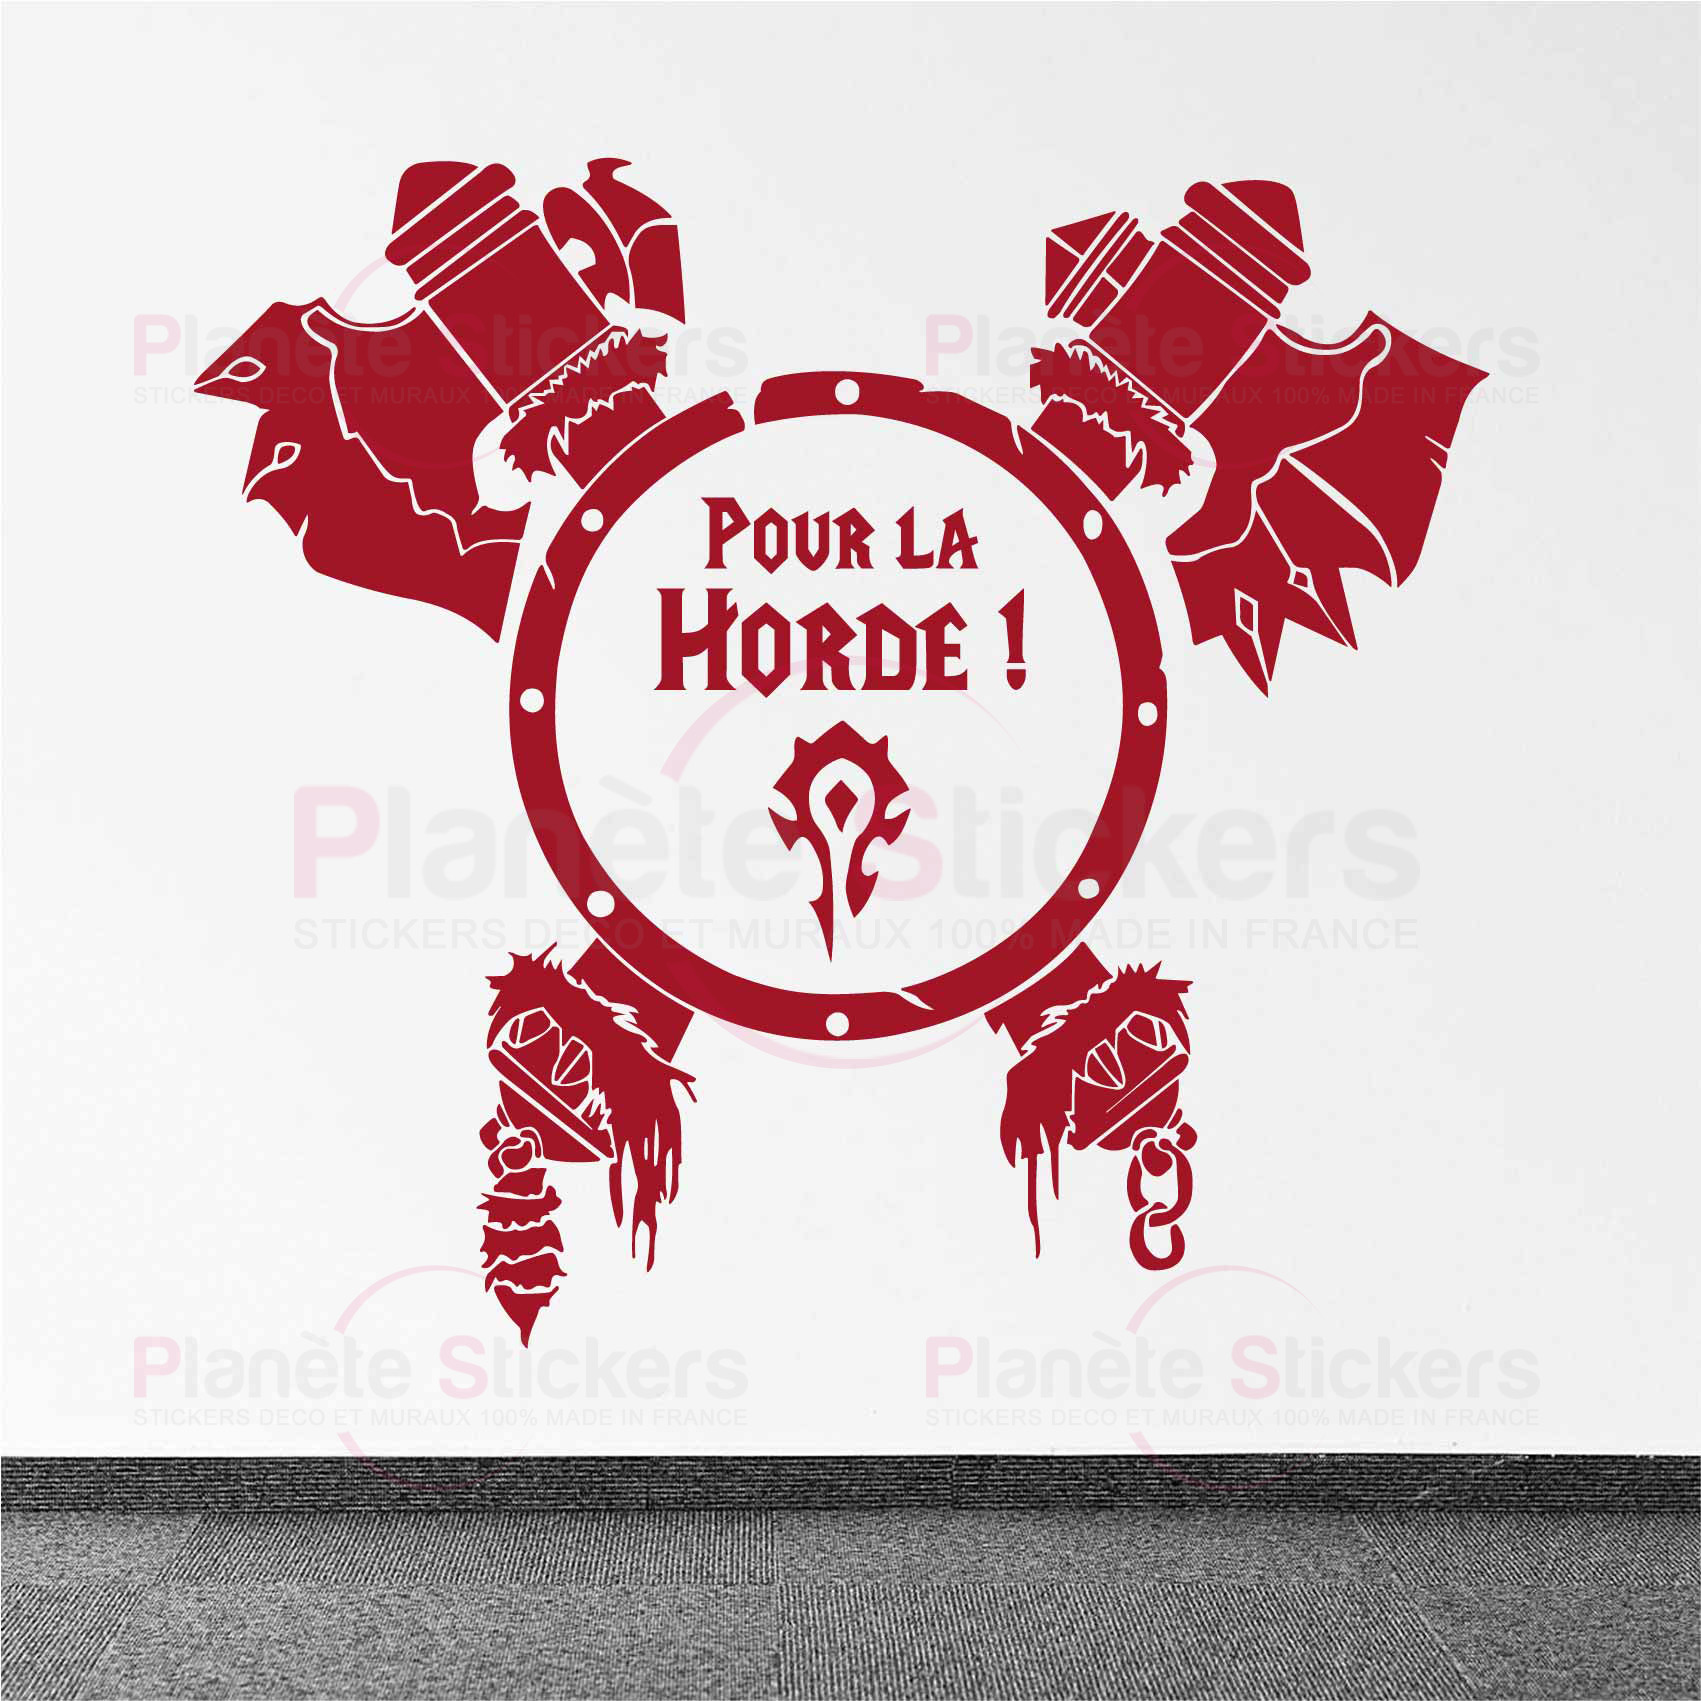 stickers-pour-la-horde-bouclier-wow-ref25wow-stickers-muraux-world-of-warcraft-autocollant-mural-jeux-video-sticker-gamer-deco-gaming-salon-chambre